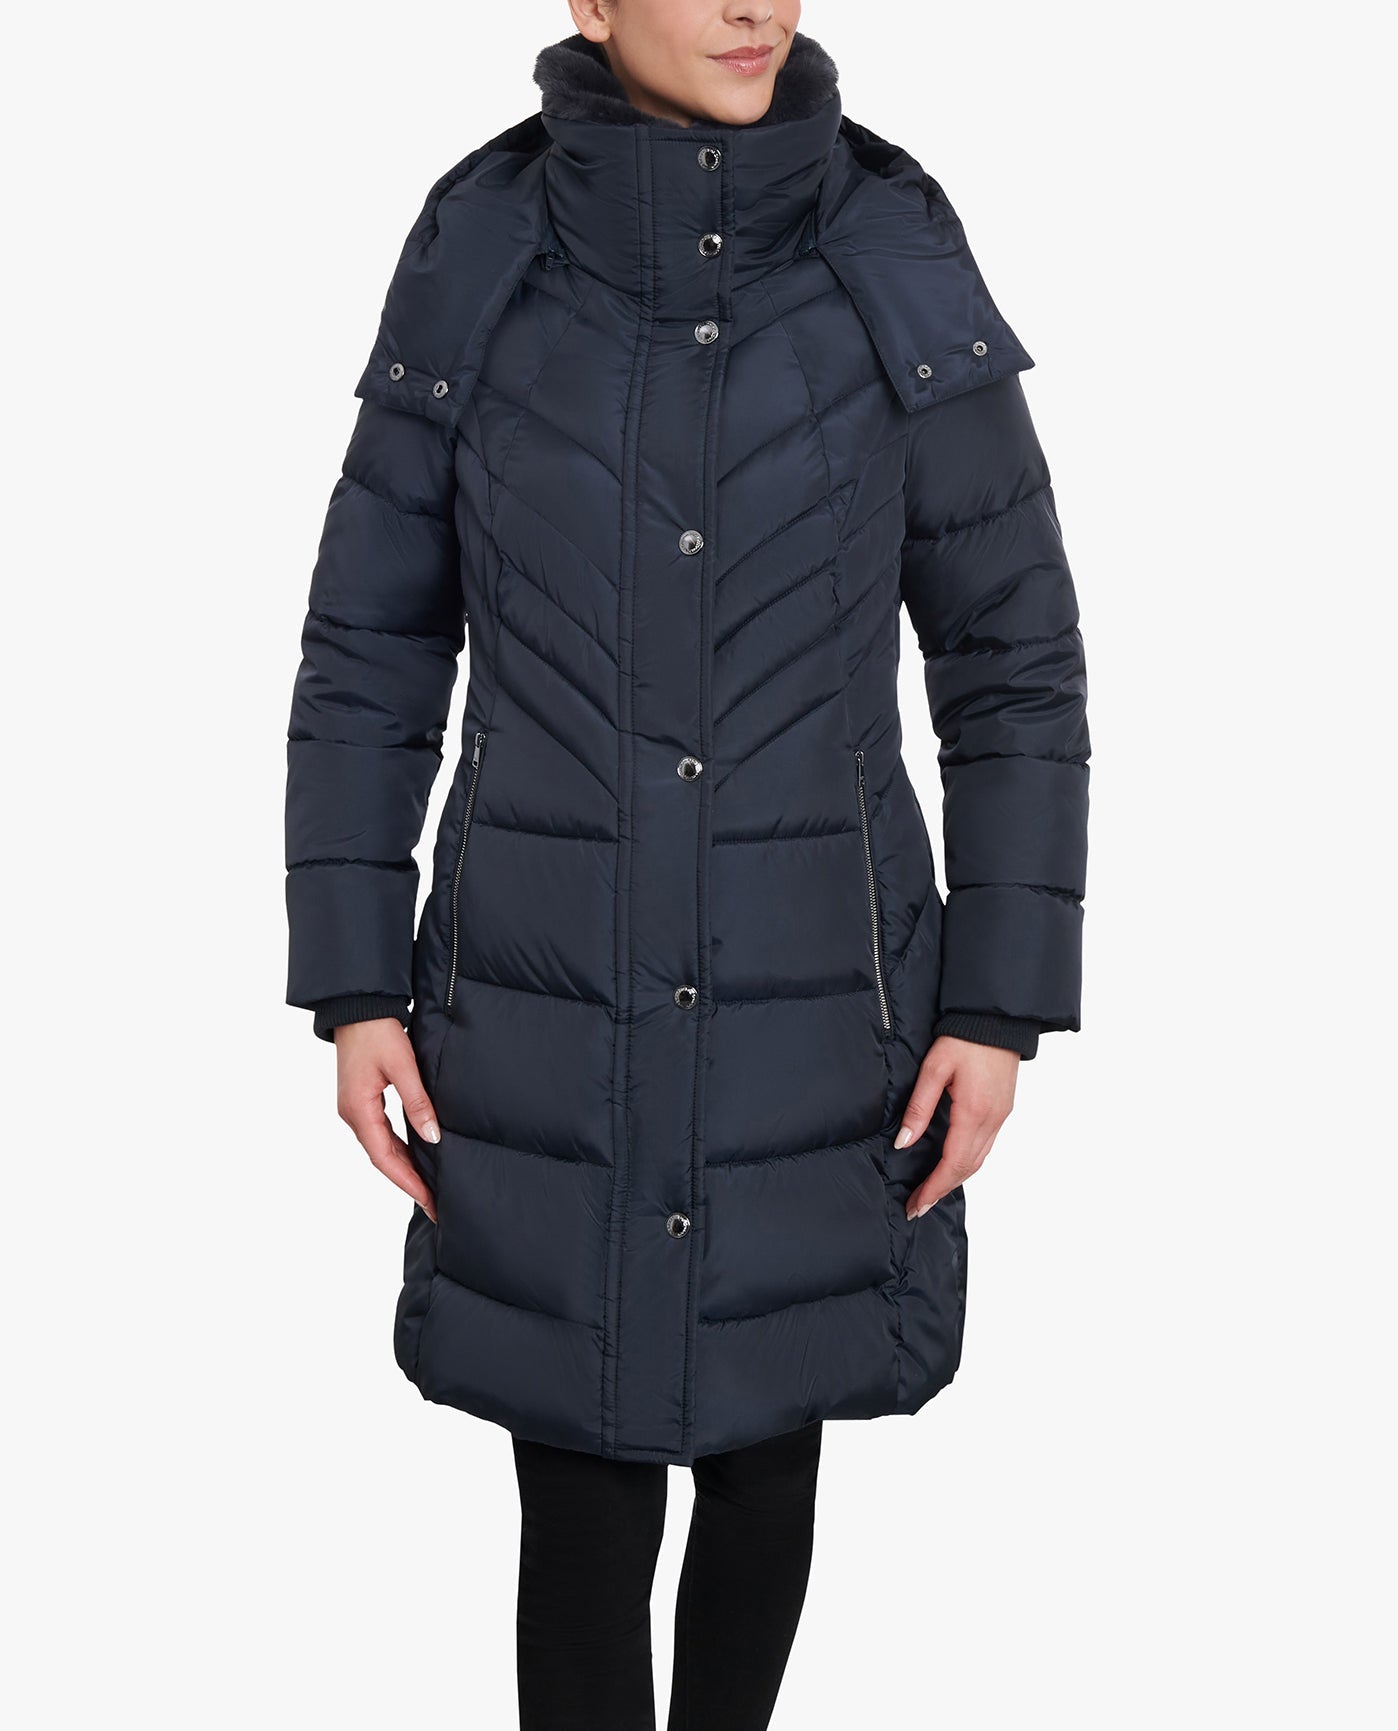 SIDE VIEW OF PLUS SIZE ZIP-FRONT HOODED HEAVY WEIGHT PUFFER JACKET WITH BUTTON-OFF FUR COLLAR | NAVY